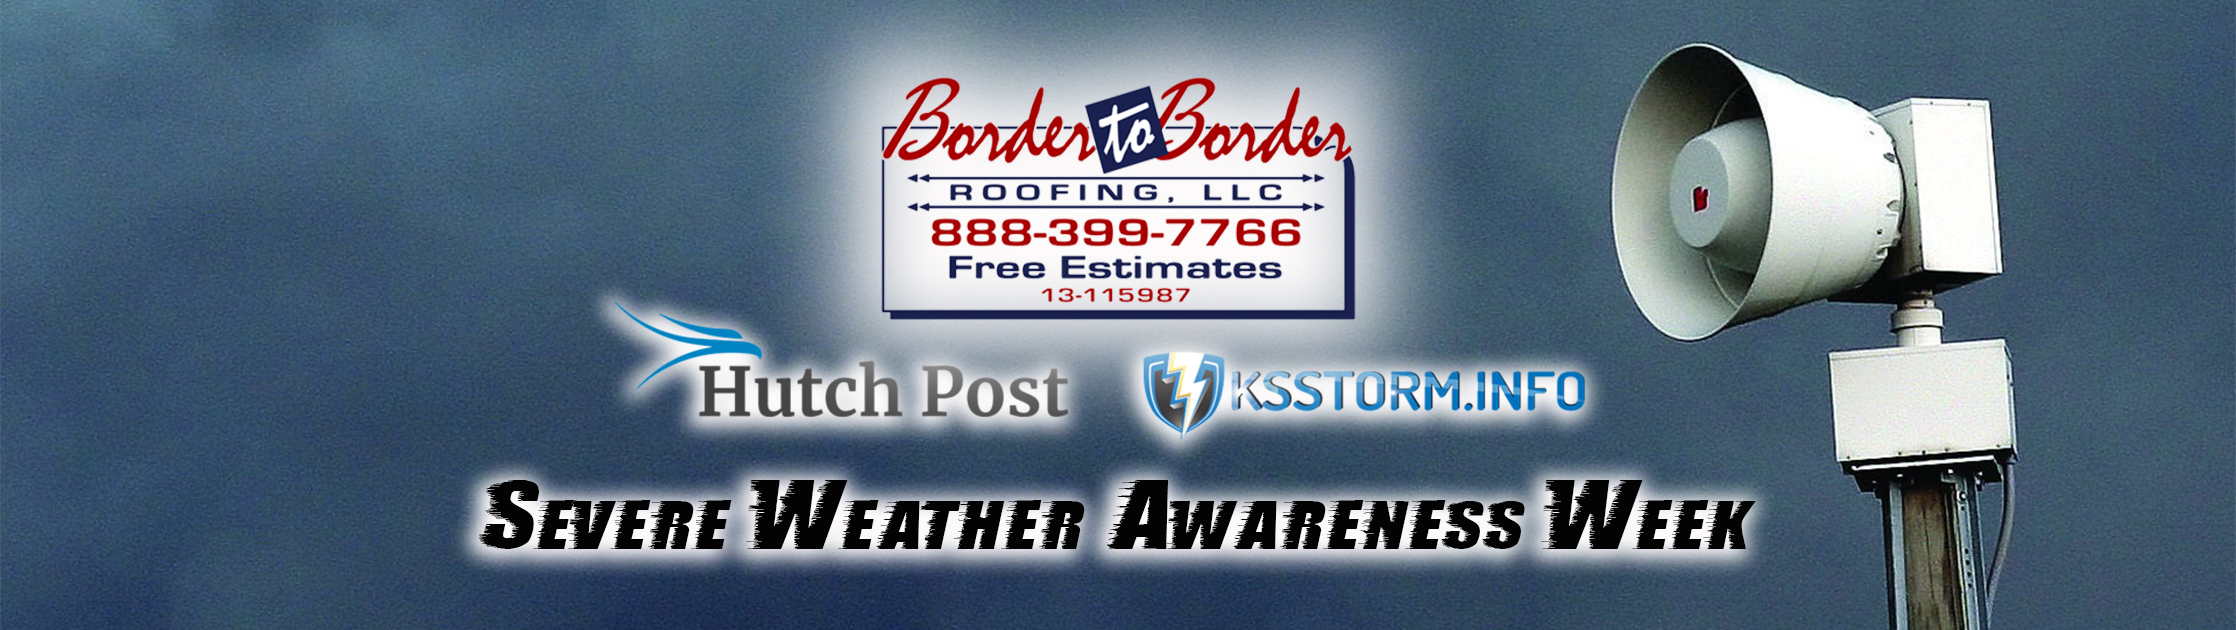 severe weather awareness week tuesday feature header